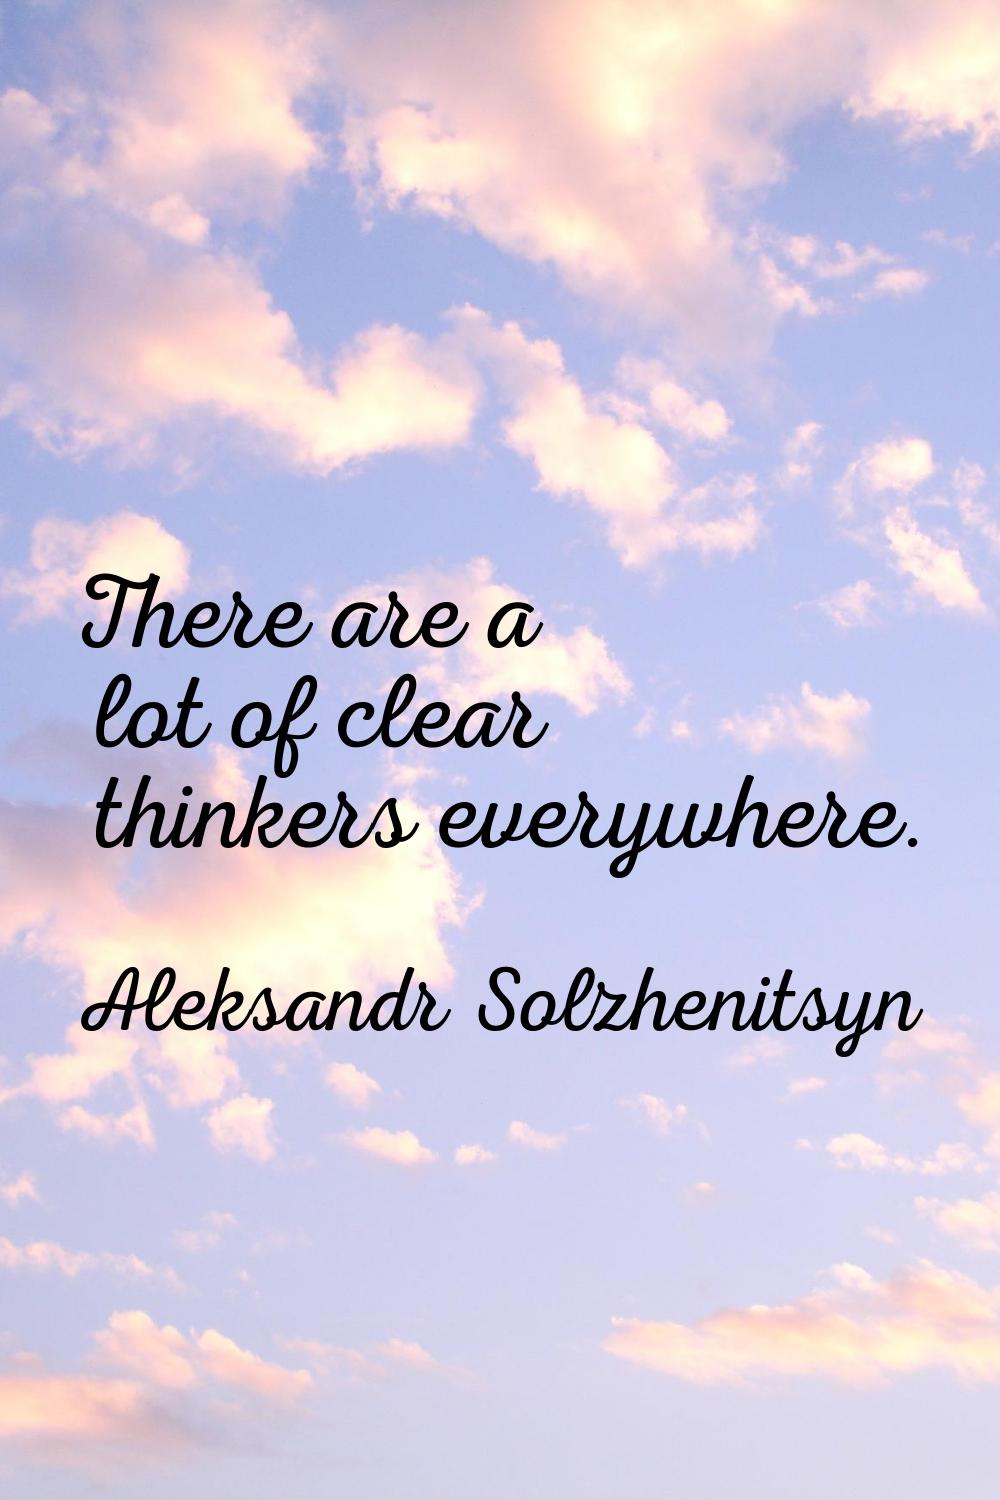 There are a lot of clear thinkers everywhere.